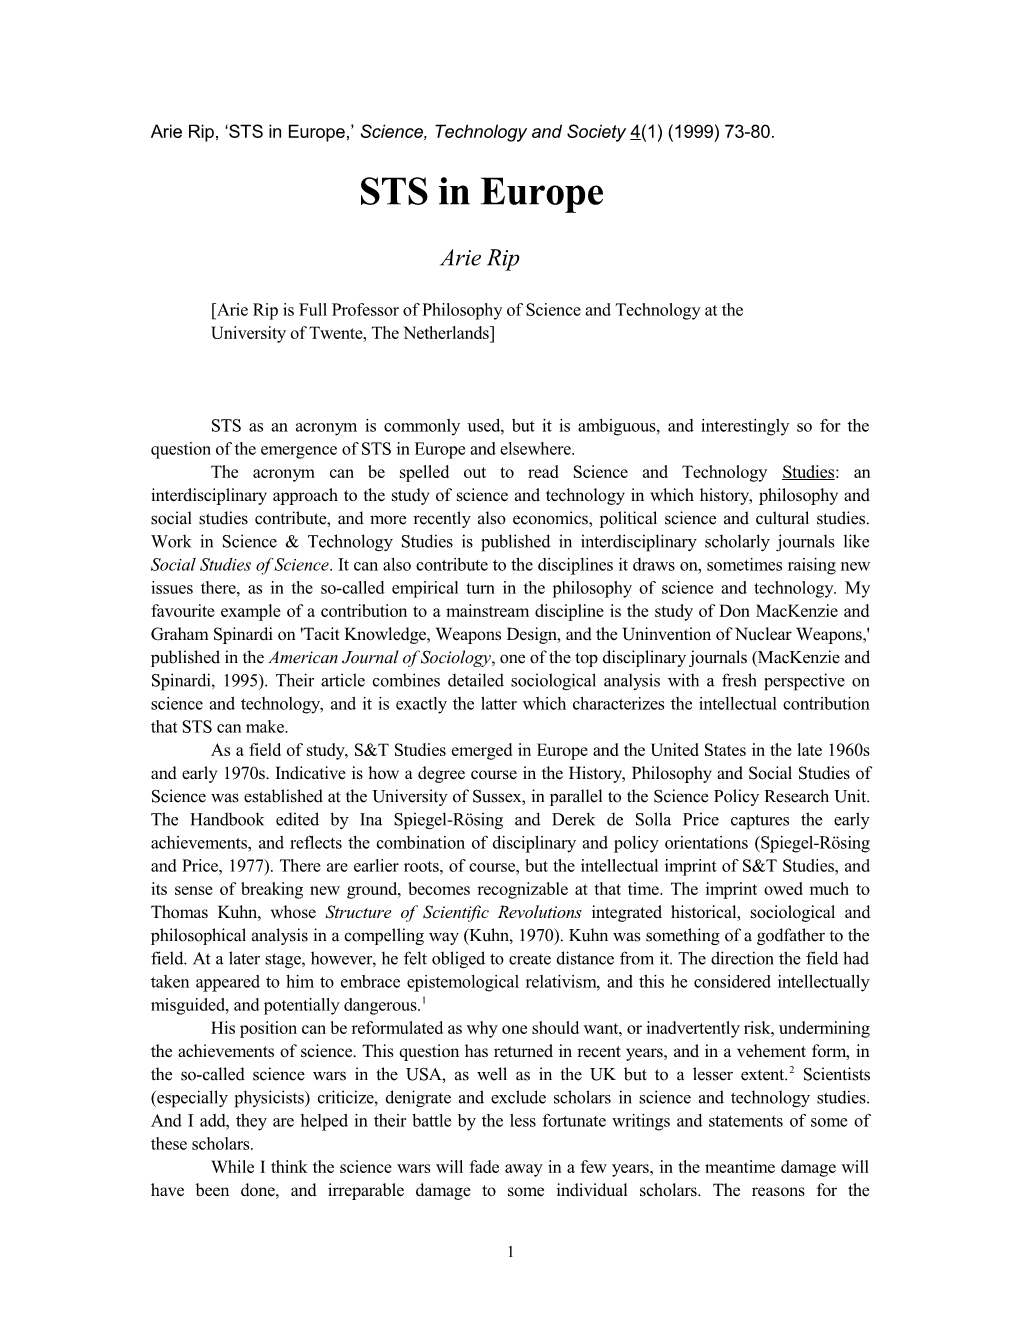 Arie Rip, STS in Europe, Science, Technology and Society 4(1) (1999) 73-80